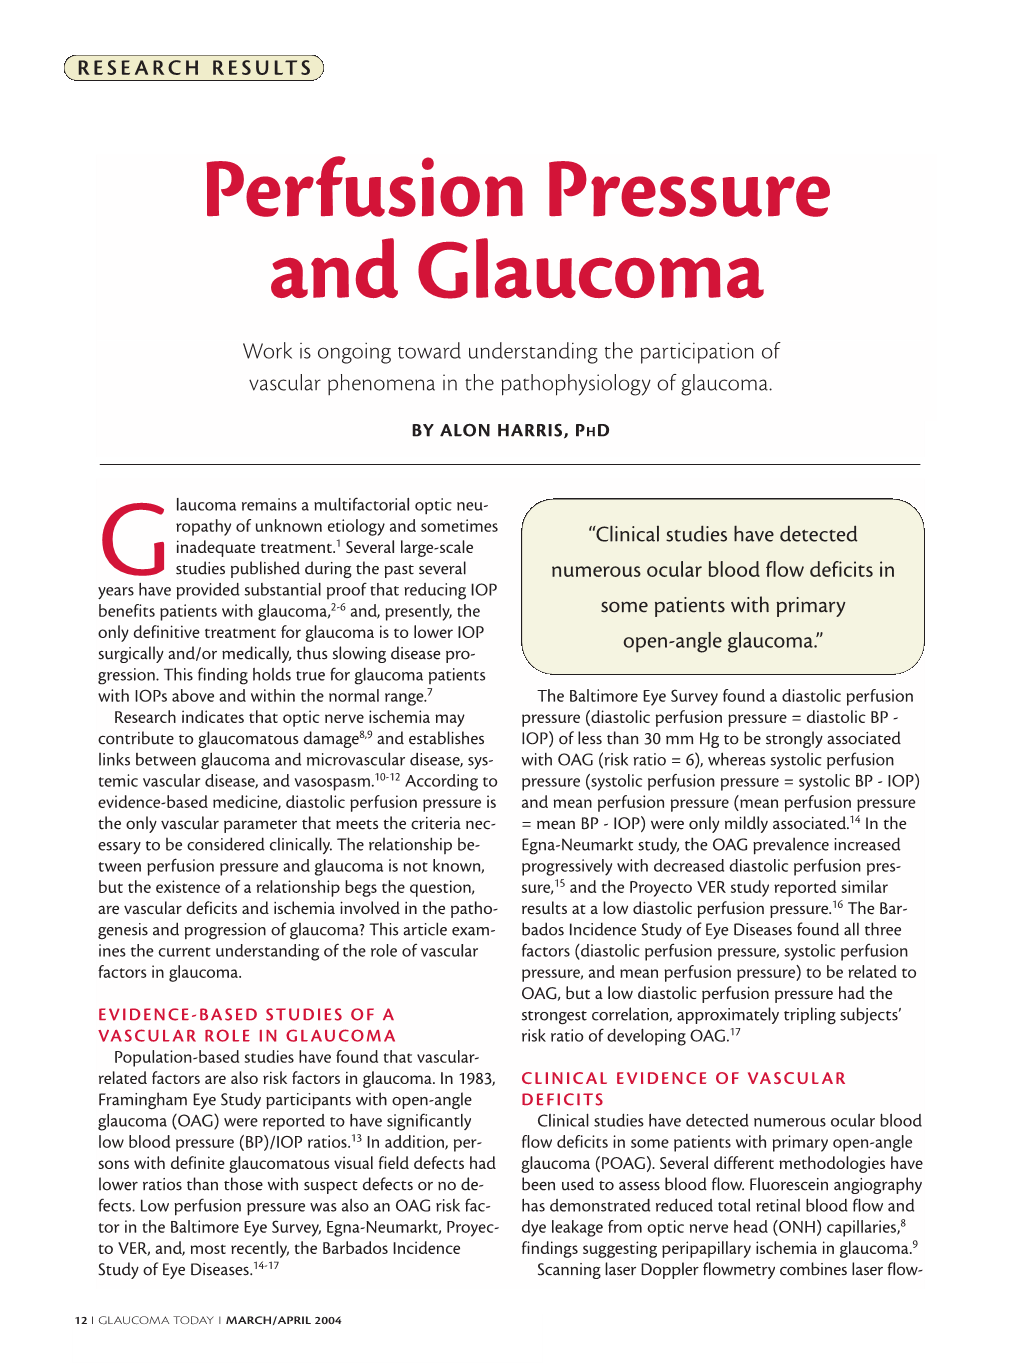 Perfusion Pressure and Glaucoma